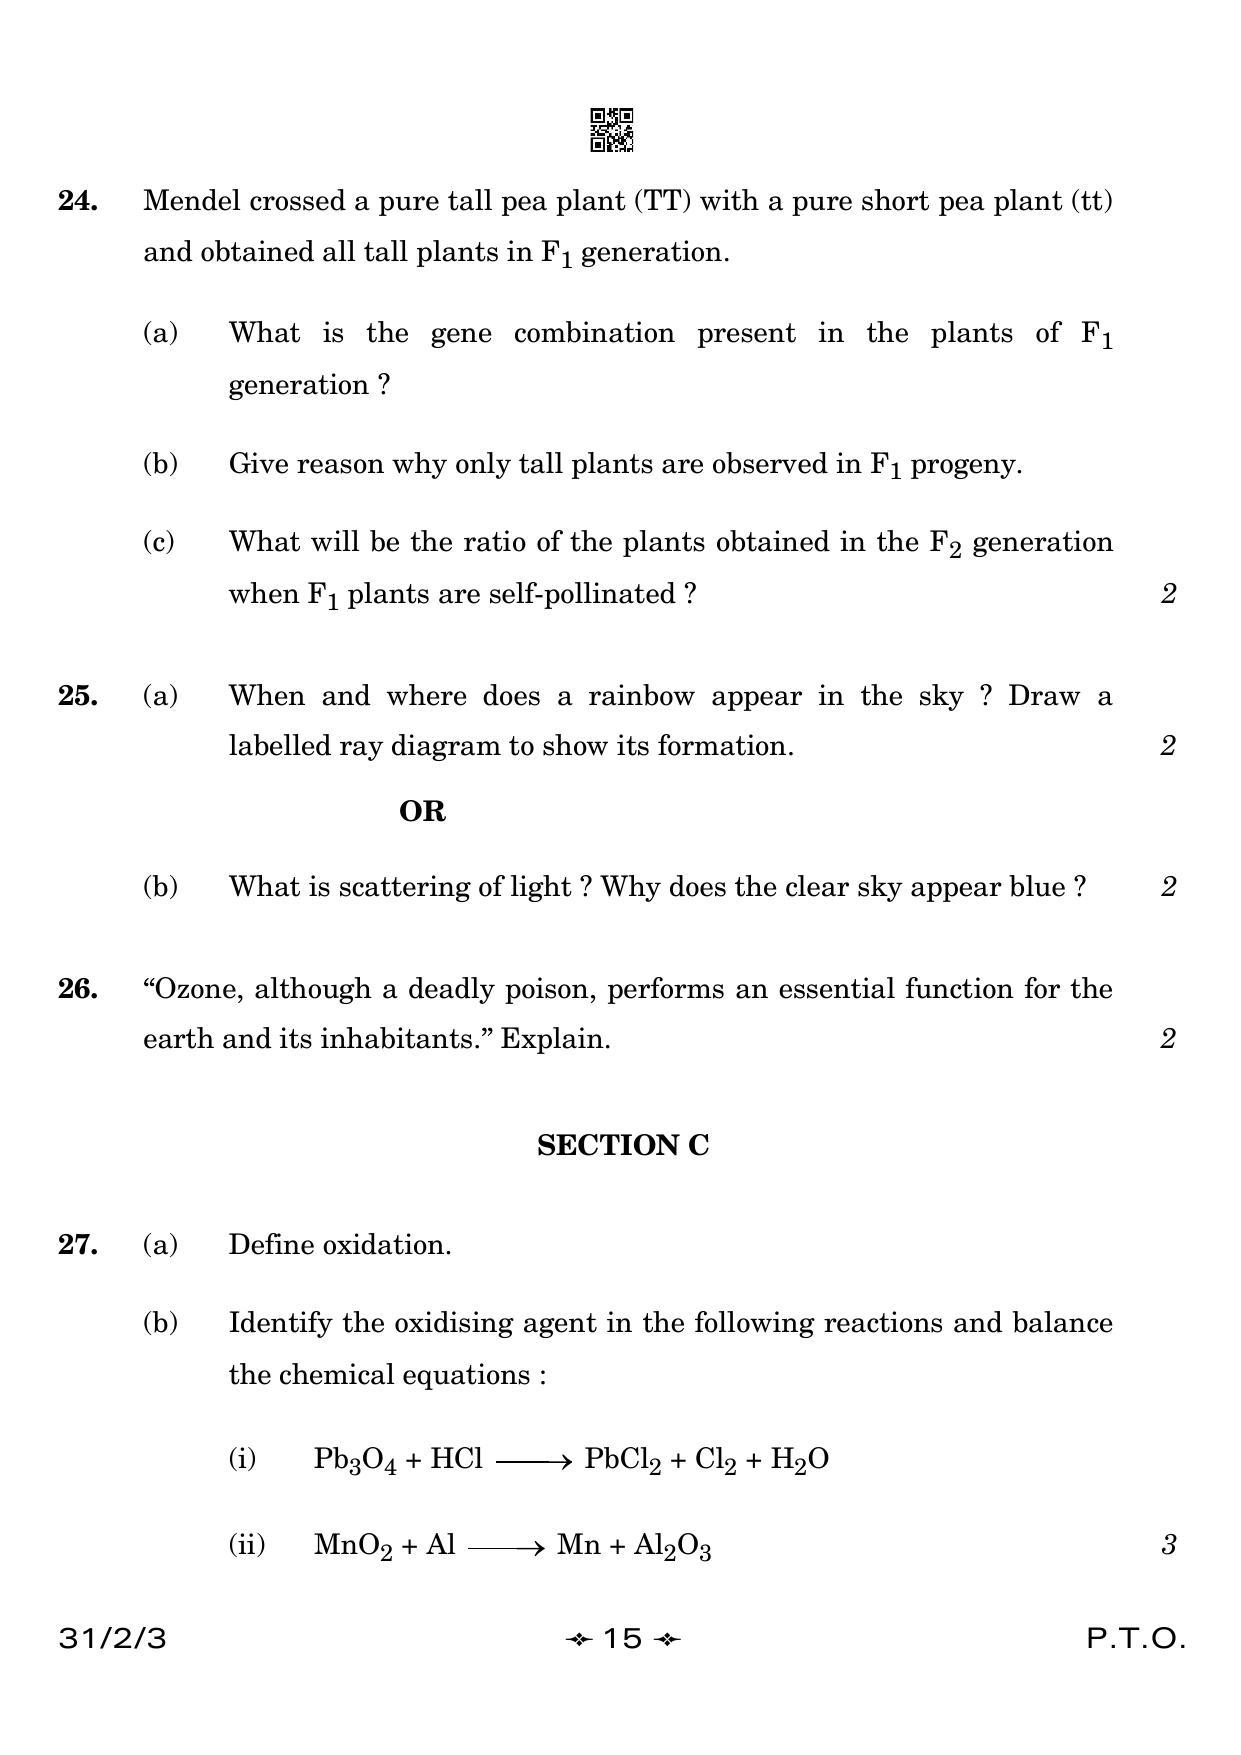 CBSE Class 10 31-2-3 Science 2023 Question Paper - Page 15